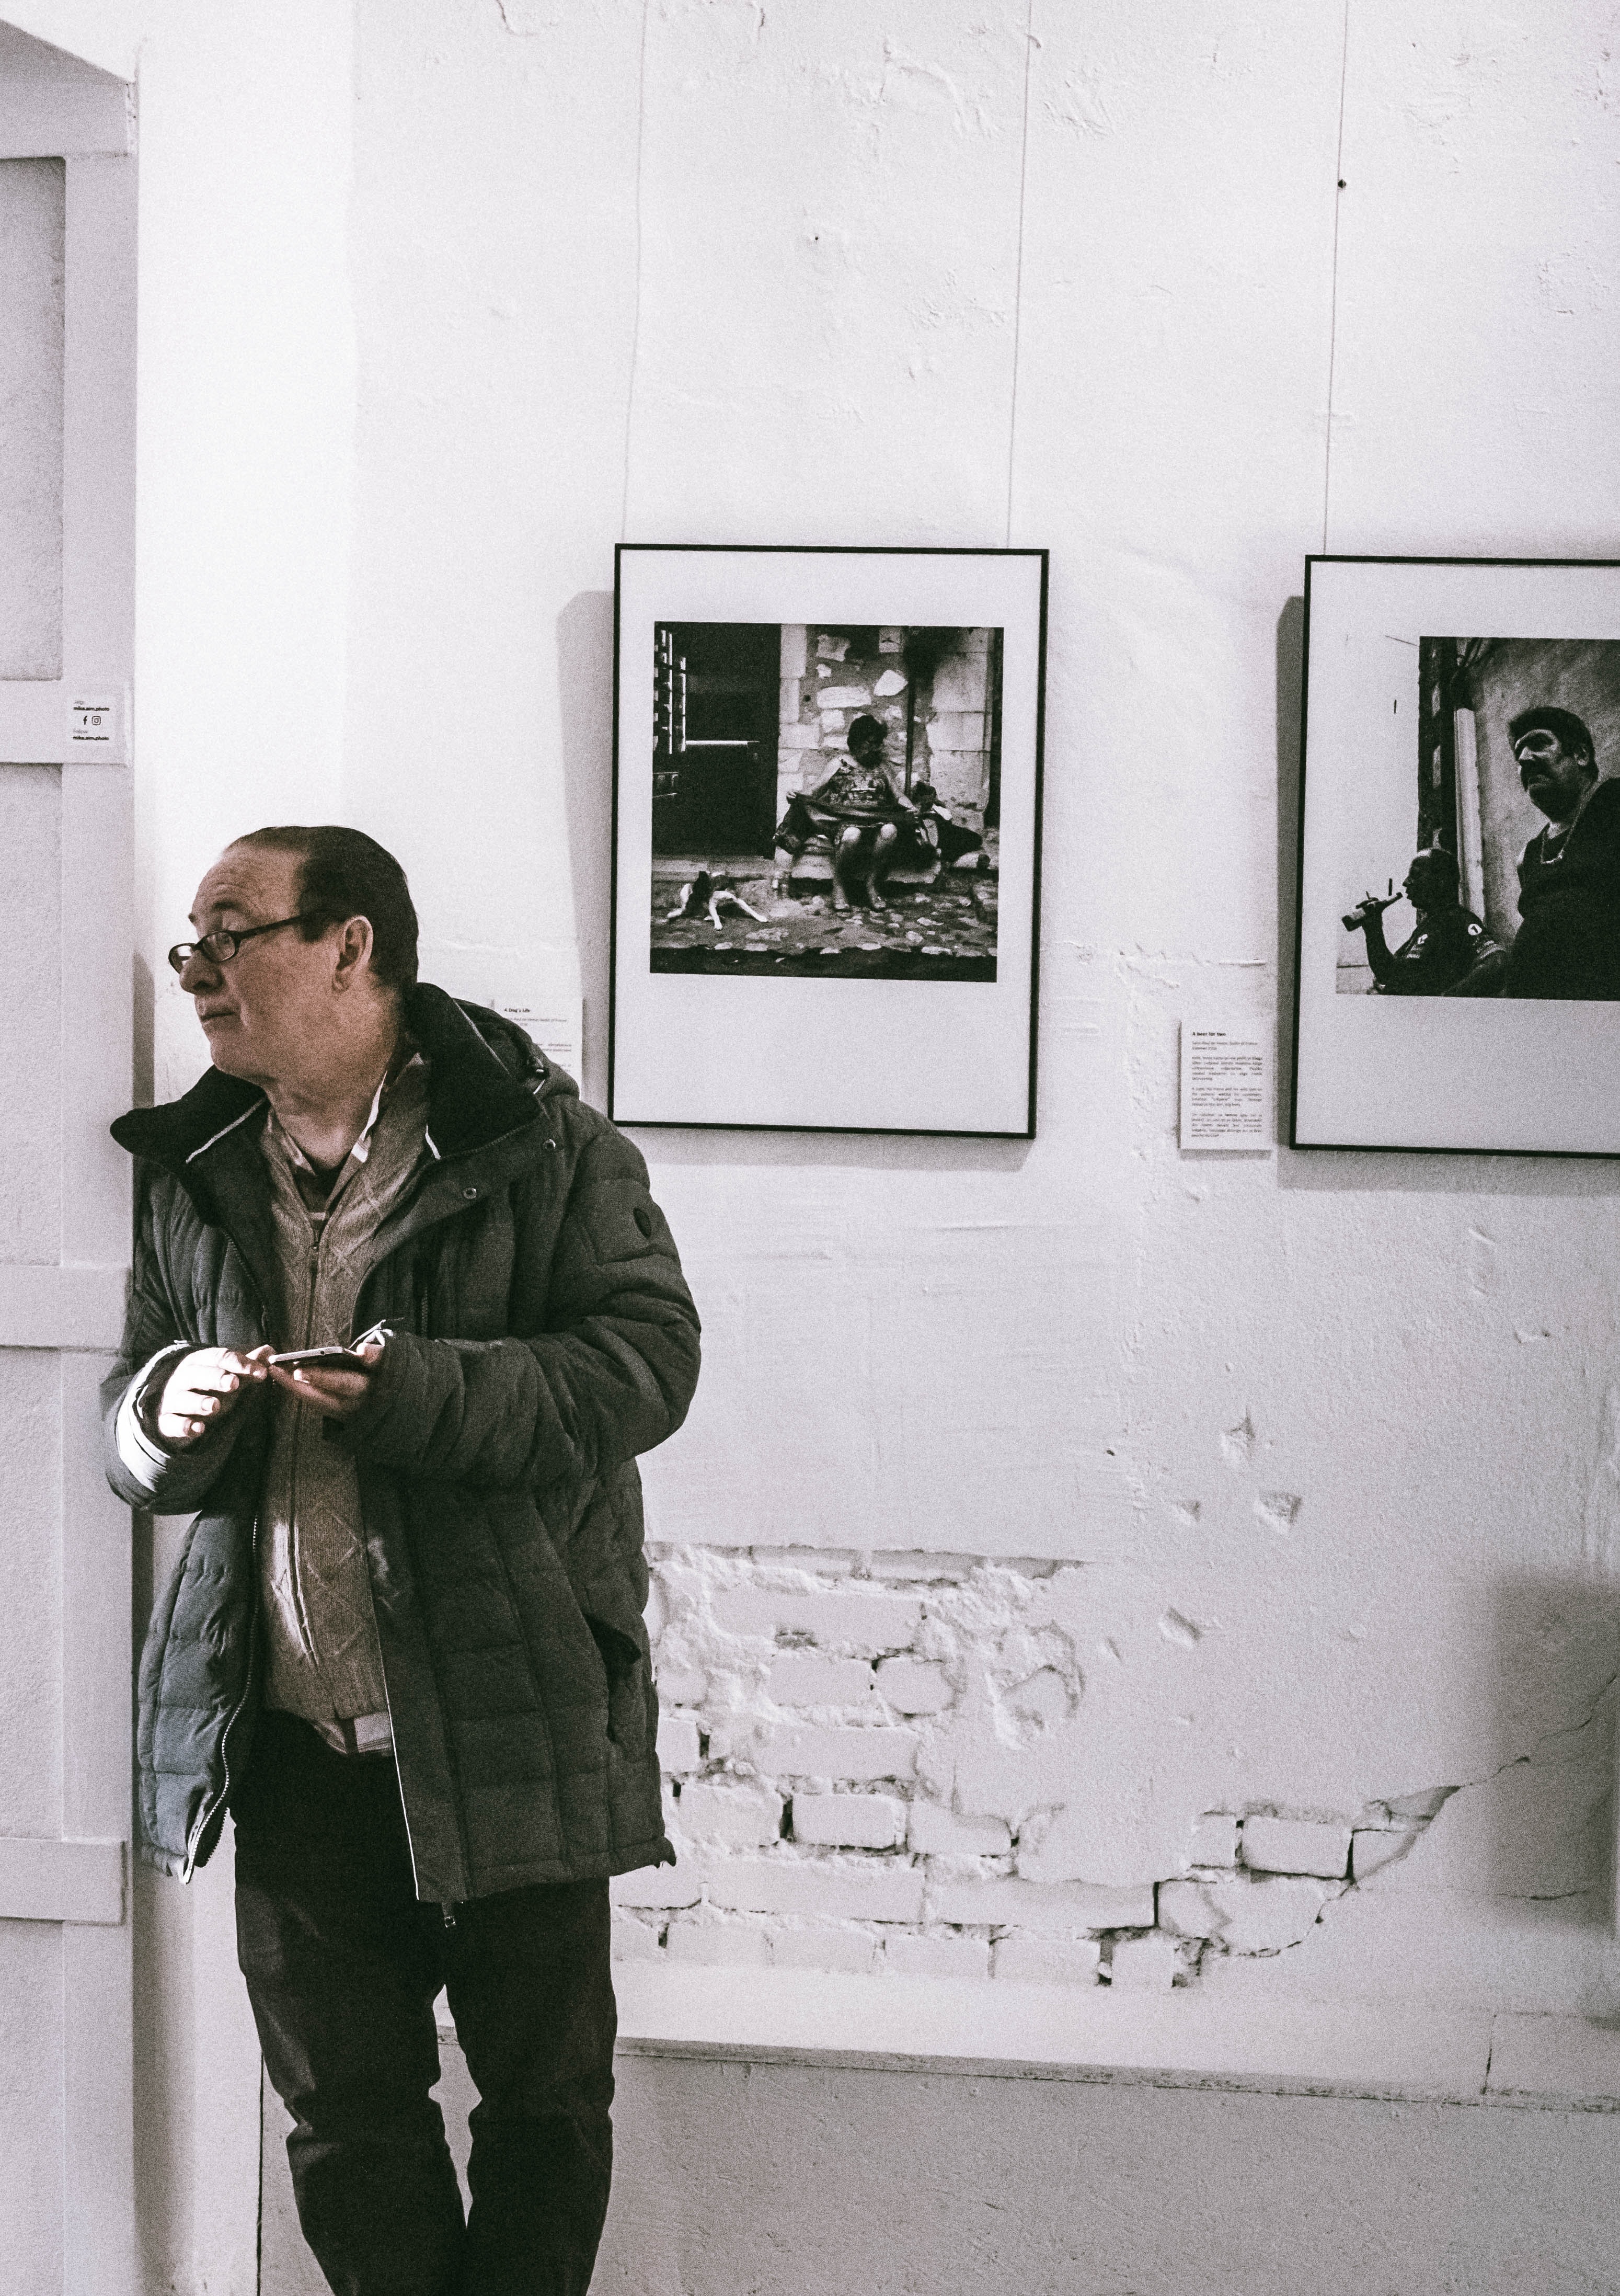 Man standing in front of grayscale gallery photo